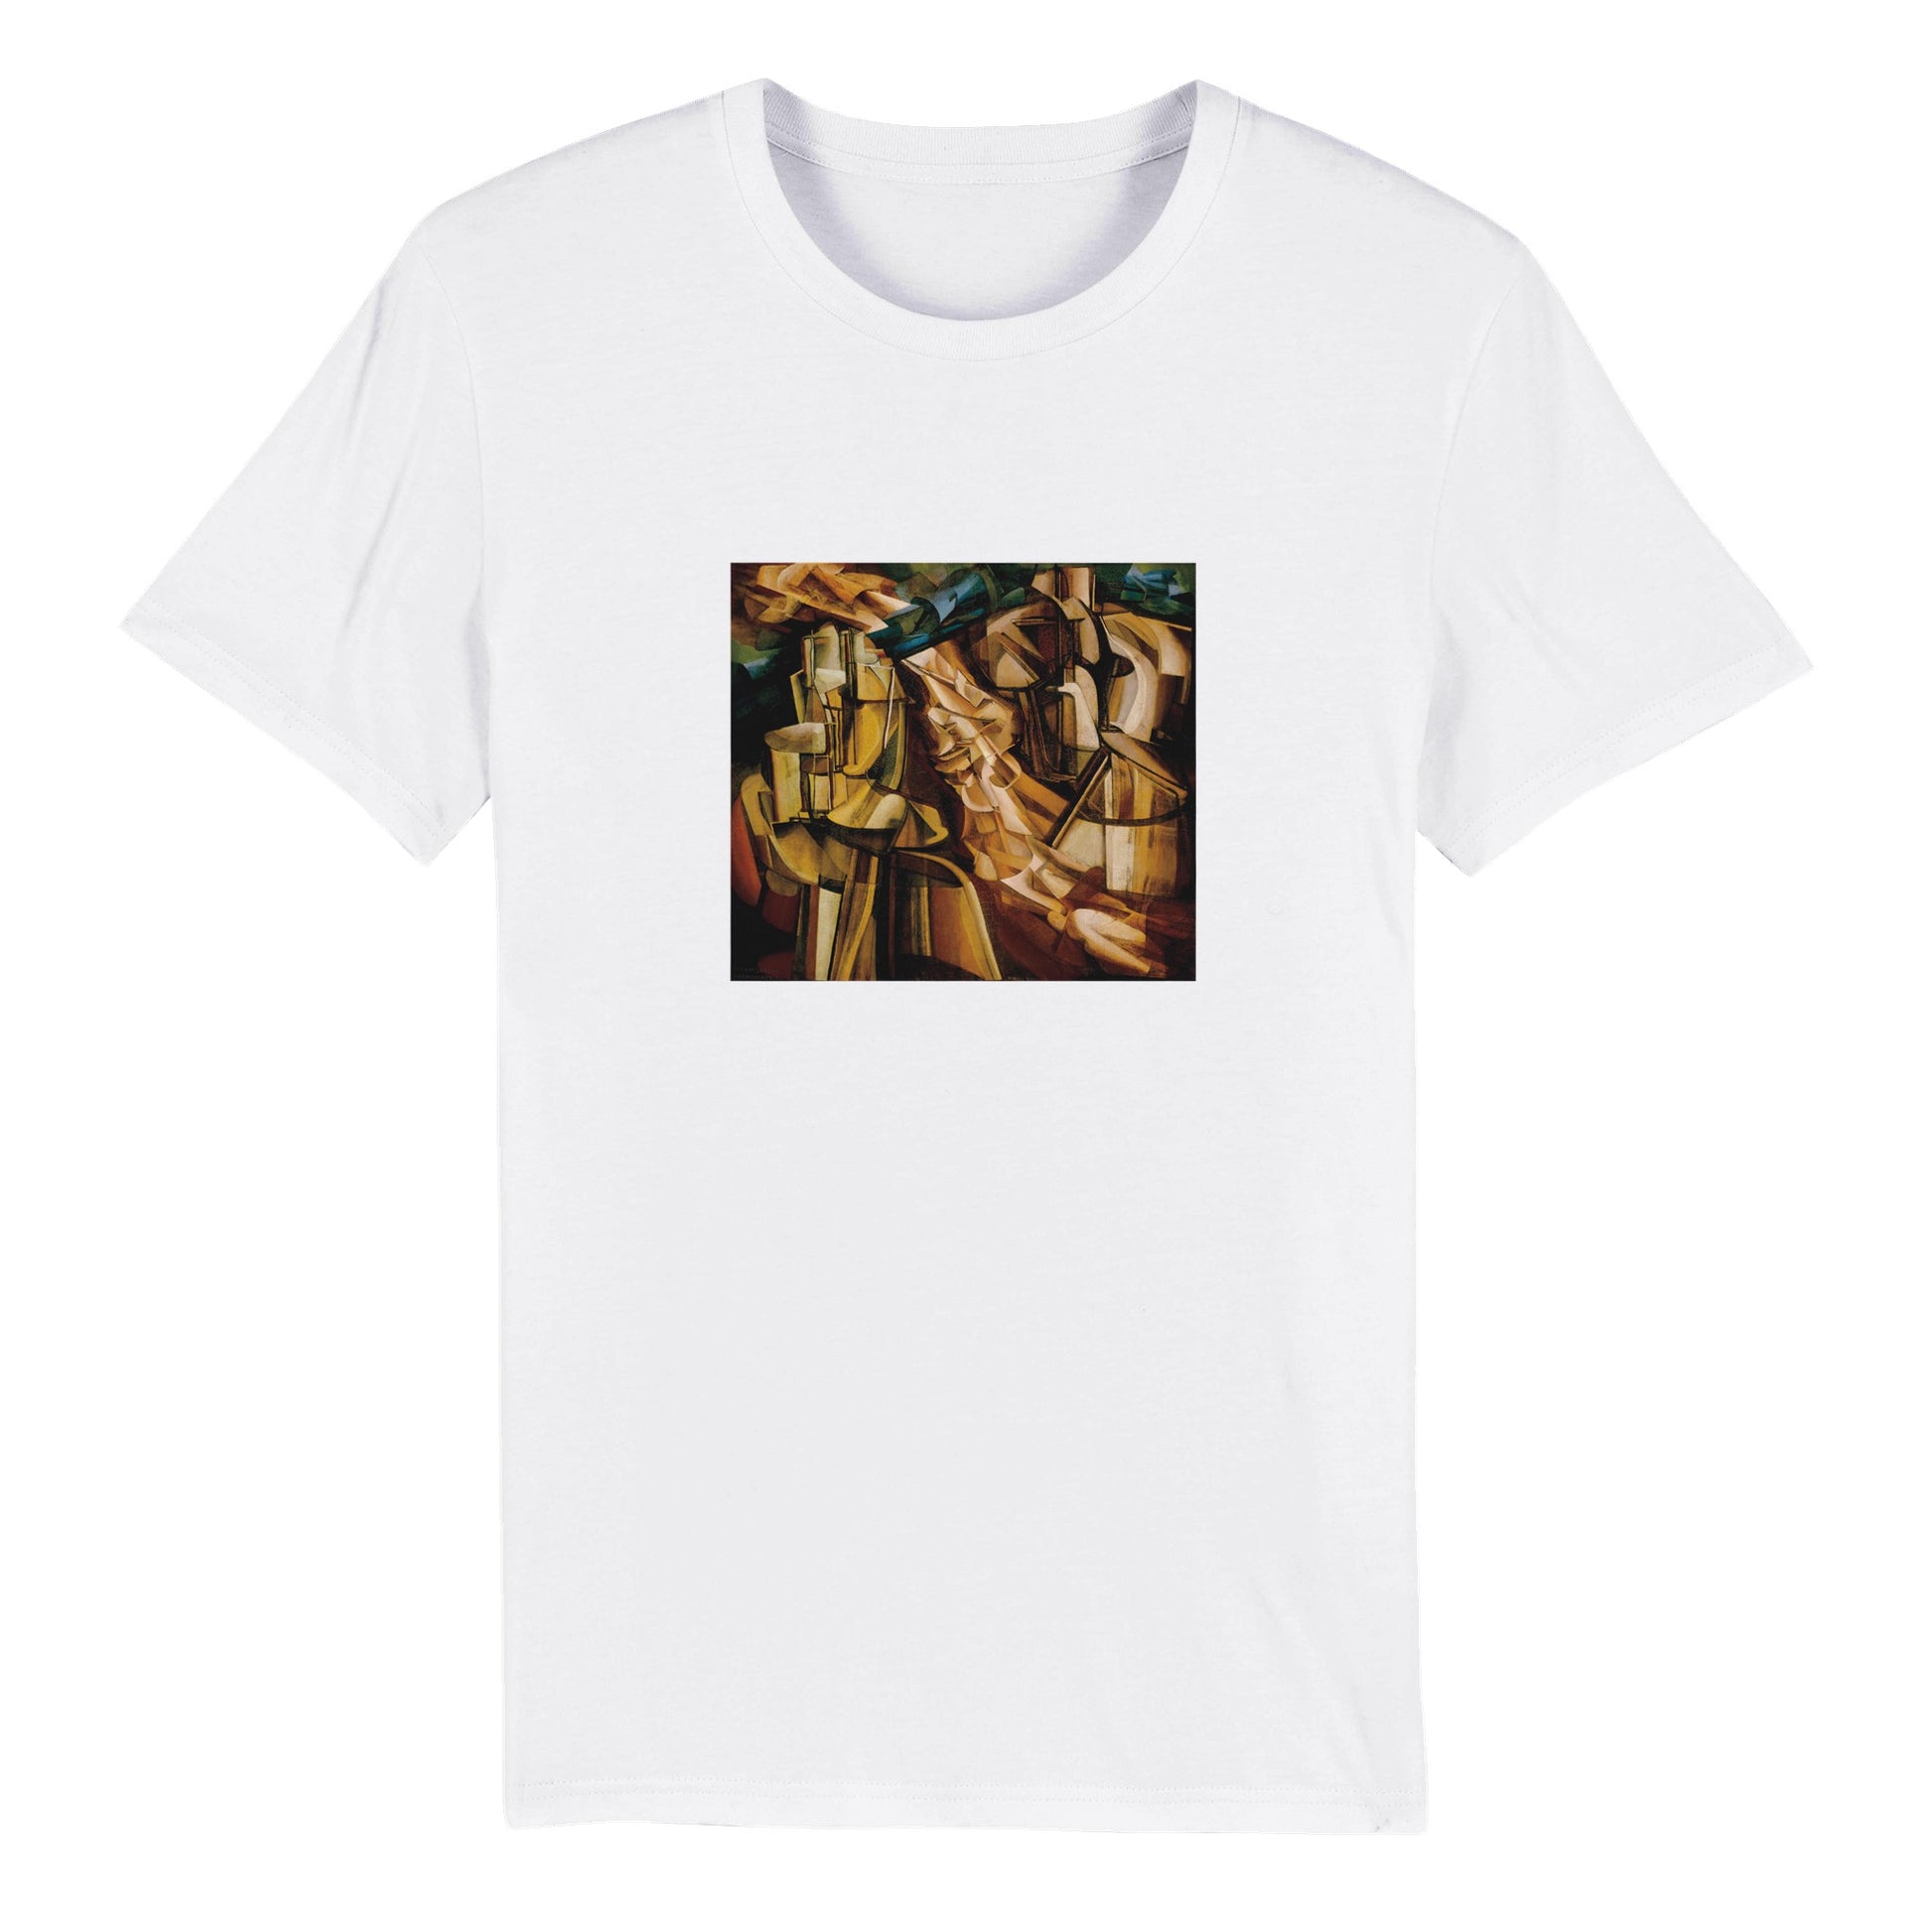 MARCEL DUCHAMP - THE KING AND QUEEN SURROUNDED BY SWIFT NUDES - ORGANIC UNISEX T-SHIRT